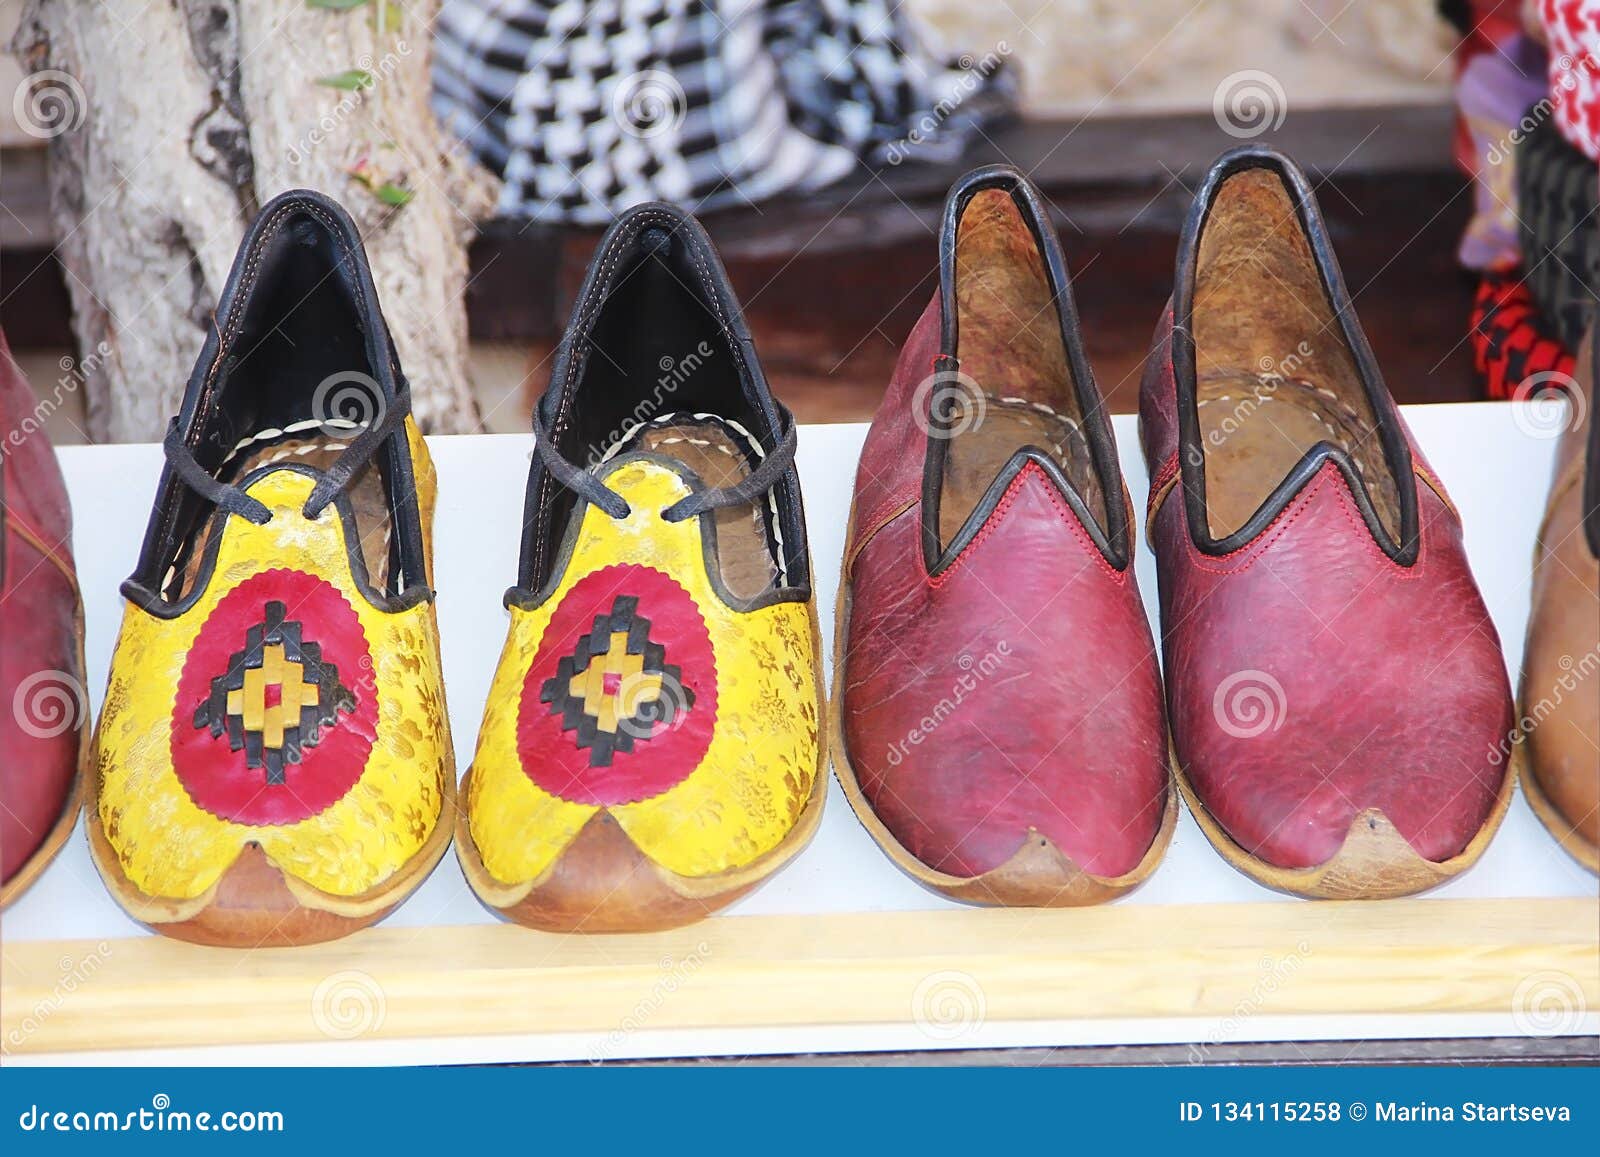 turkish slippers leather